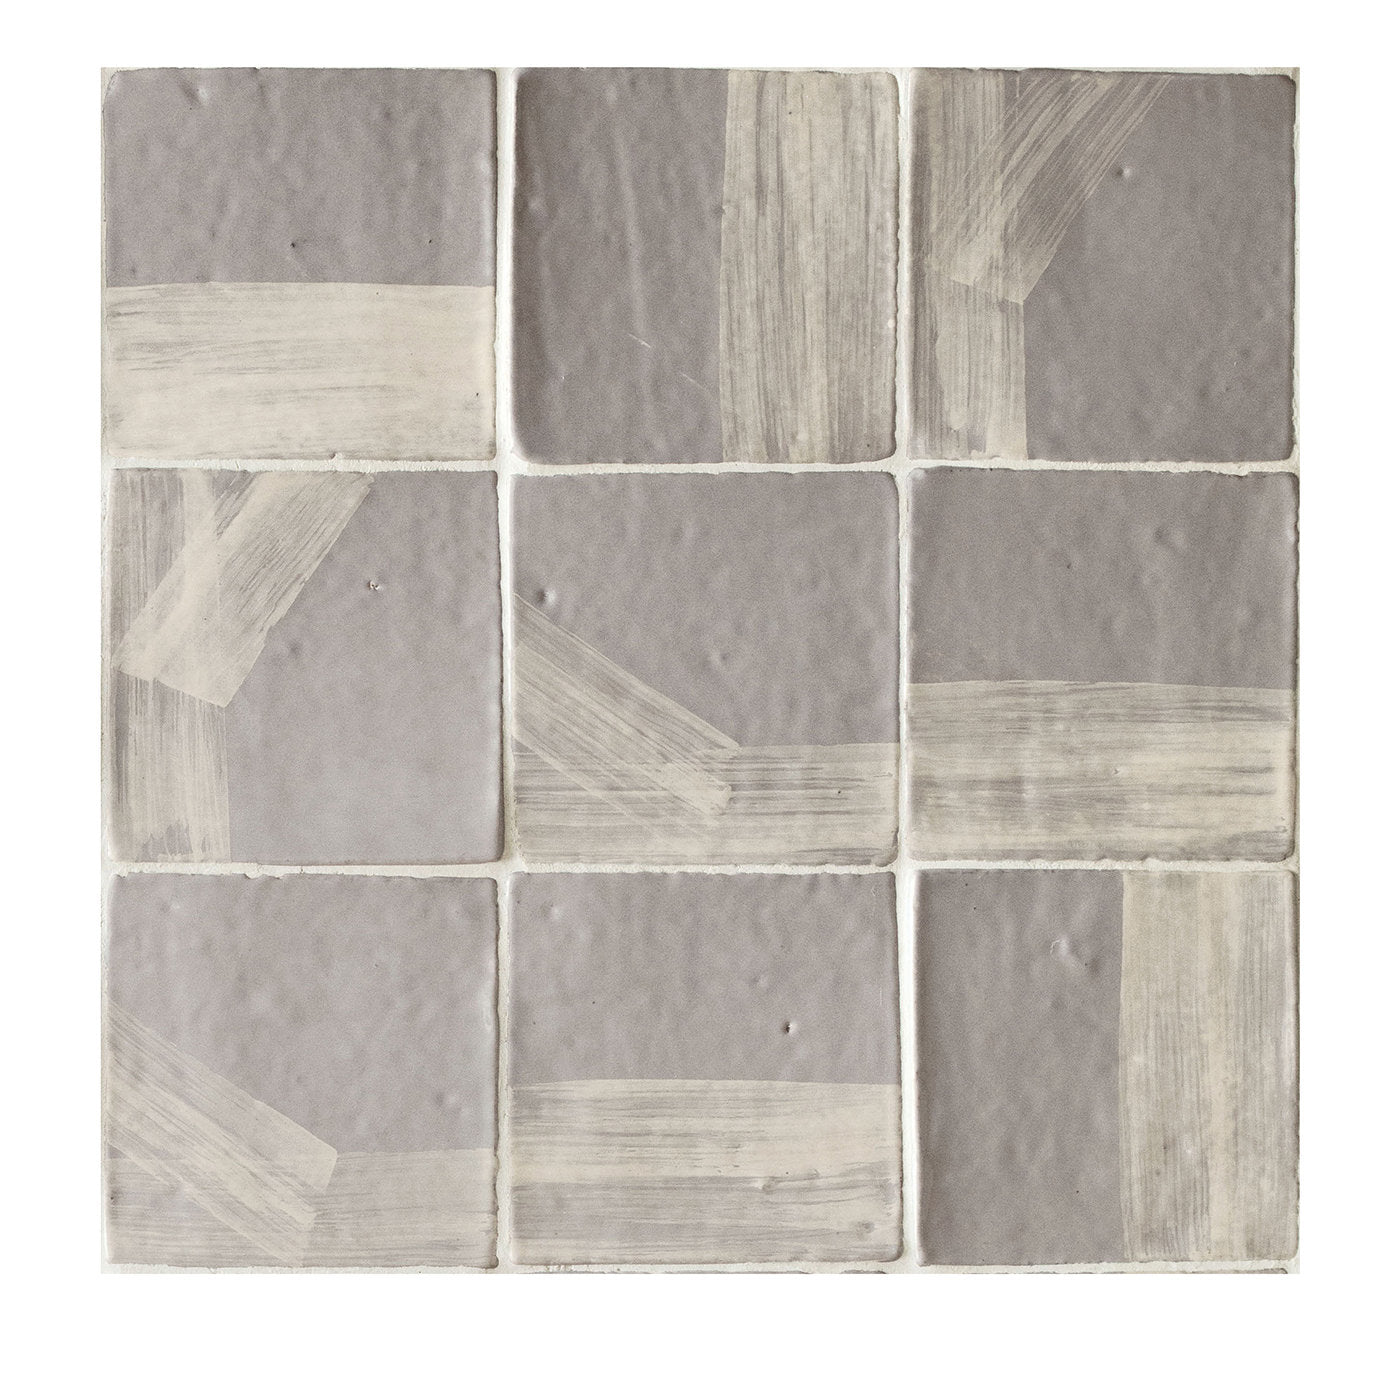 Tracce Set of 44 Gray Tiles by Margherita Rui - Main view